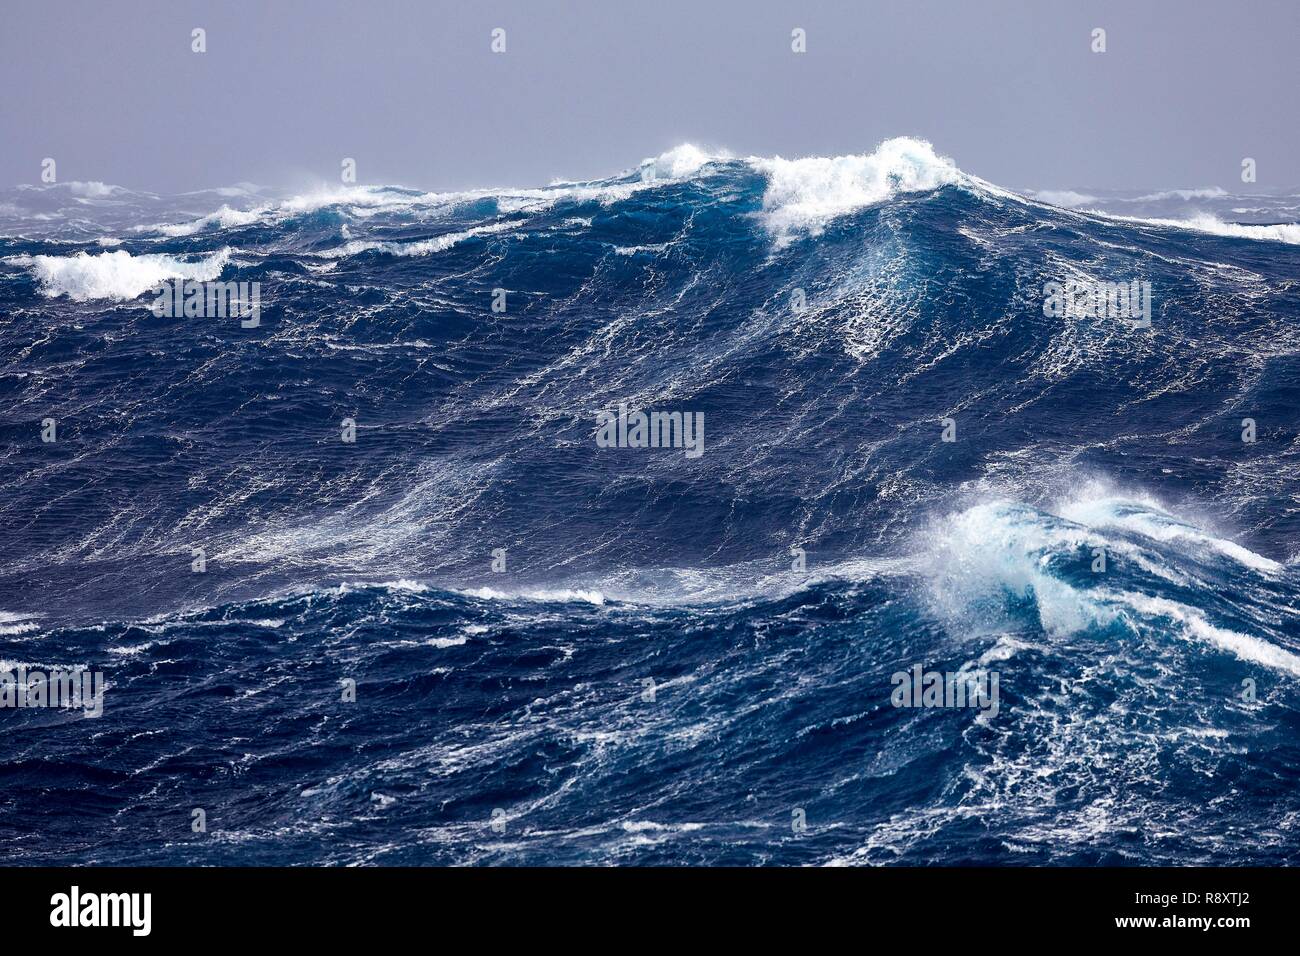 France, Indian Ocean, French Southern and Antarctic Lands, violent storm, Beaufort scale 10 gusting to 11 in the roaring forties, picture taken aboard the Marion Dufresne (supply ship of French Southern and Antarctic Territories) underway from Crozet Islands to Kerguelen Islands Stock Photo